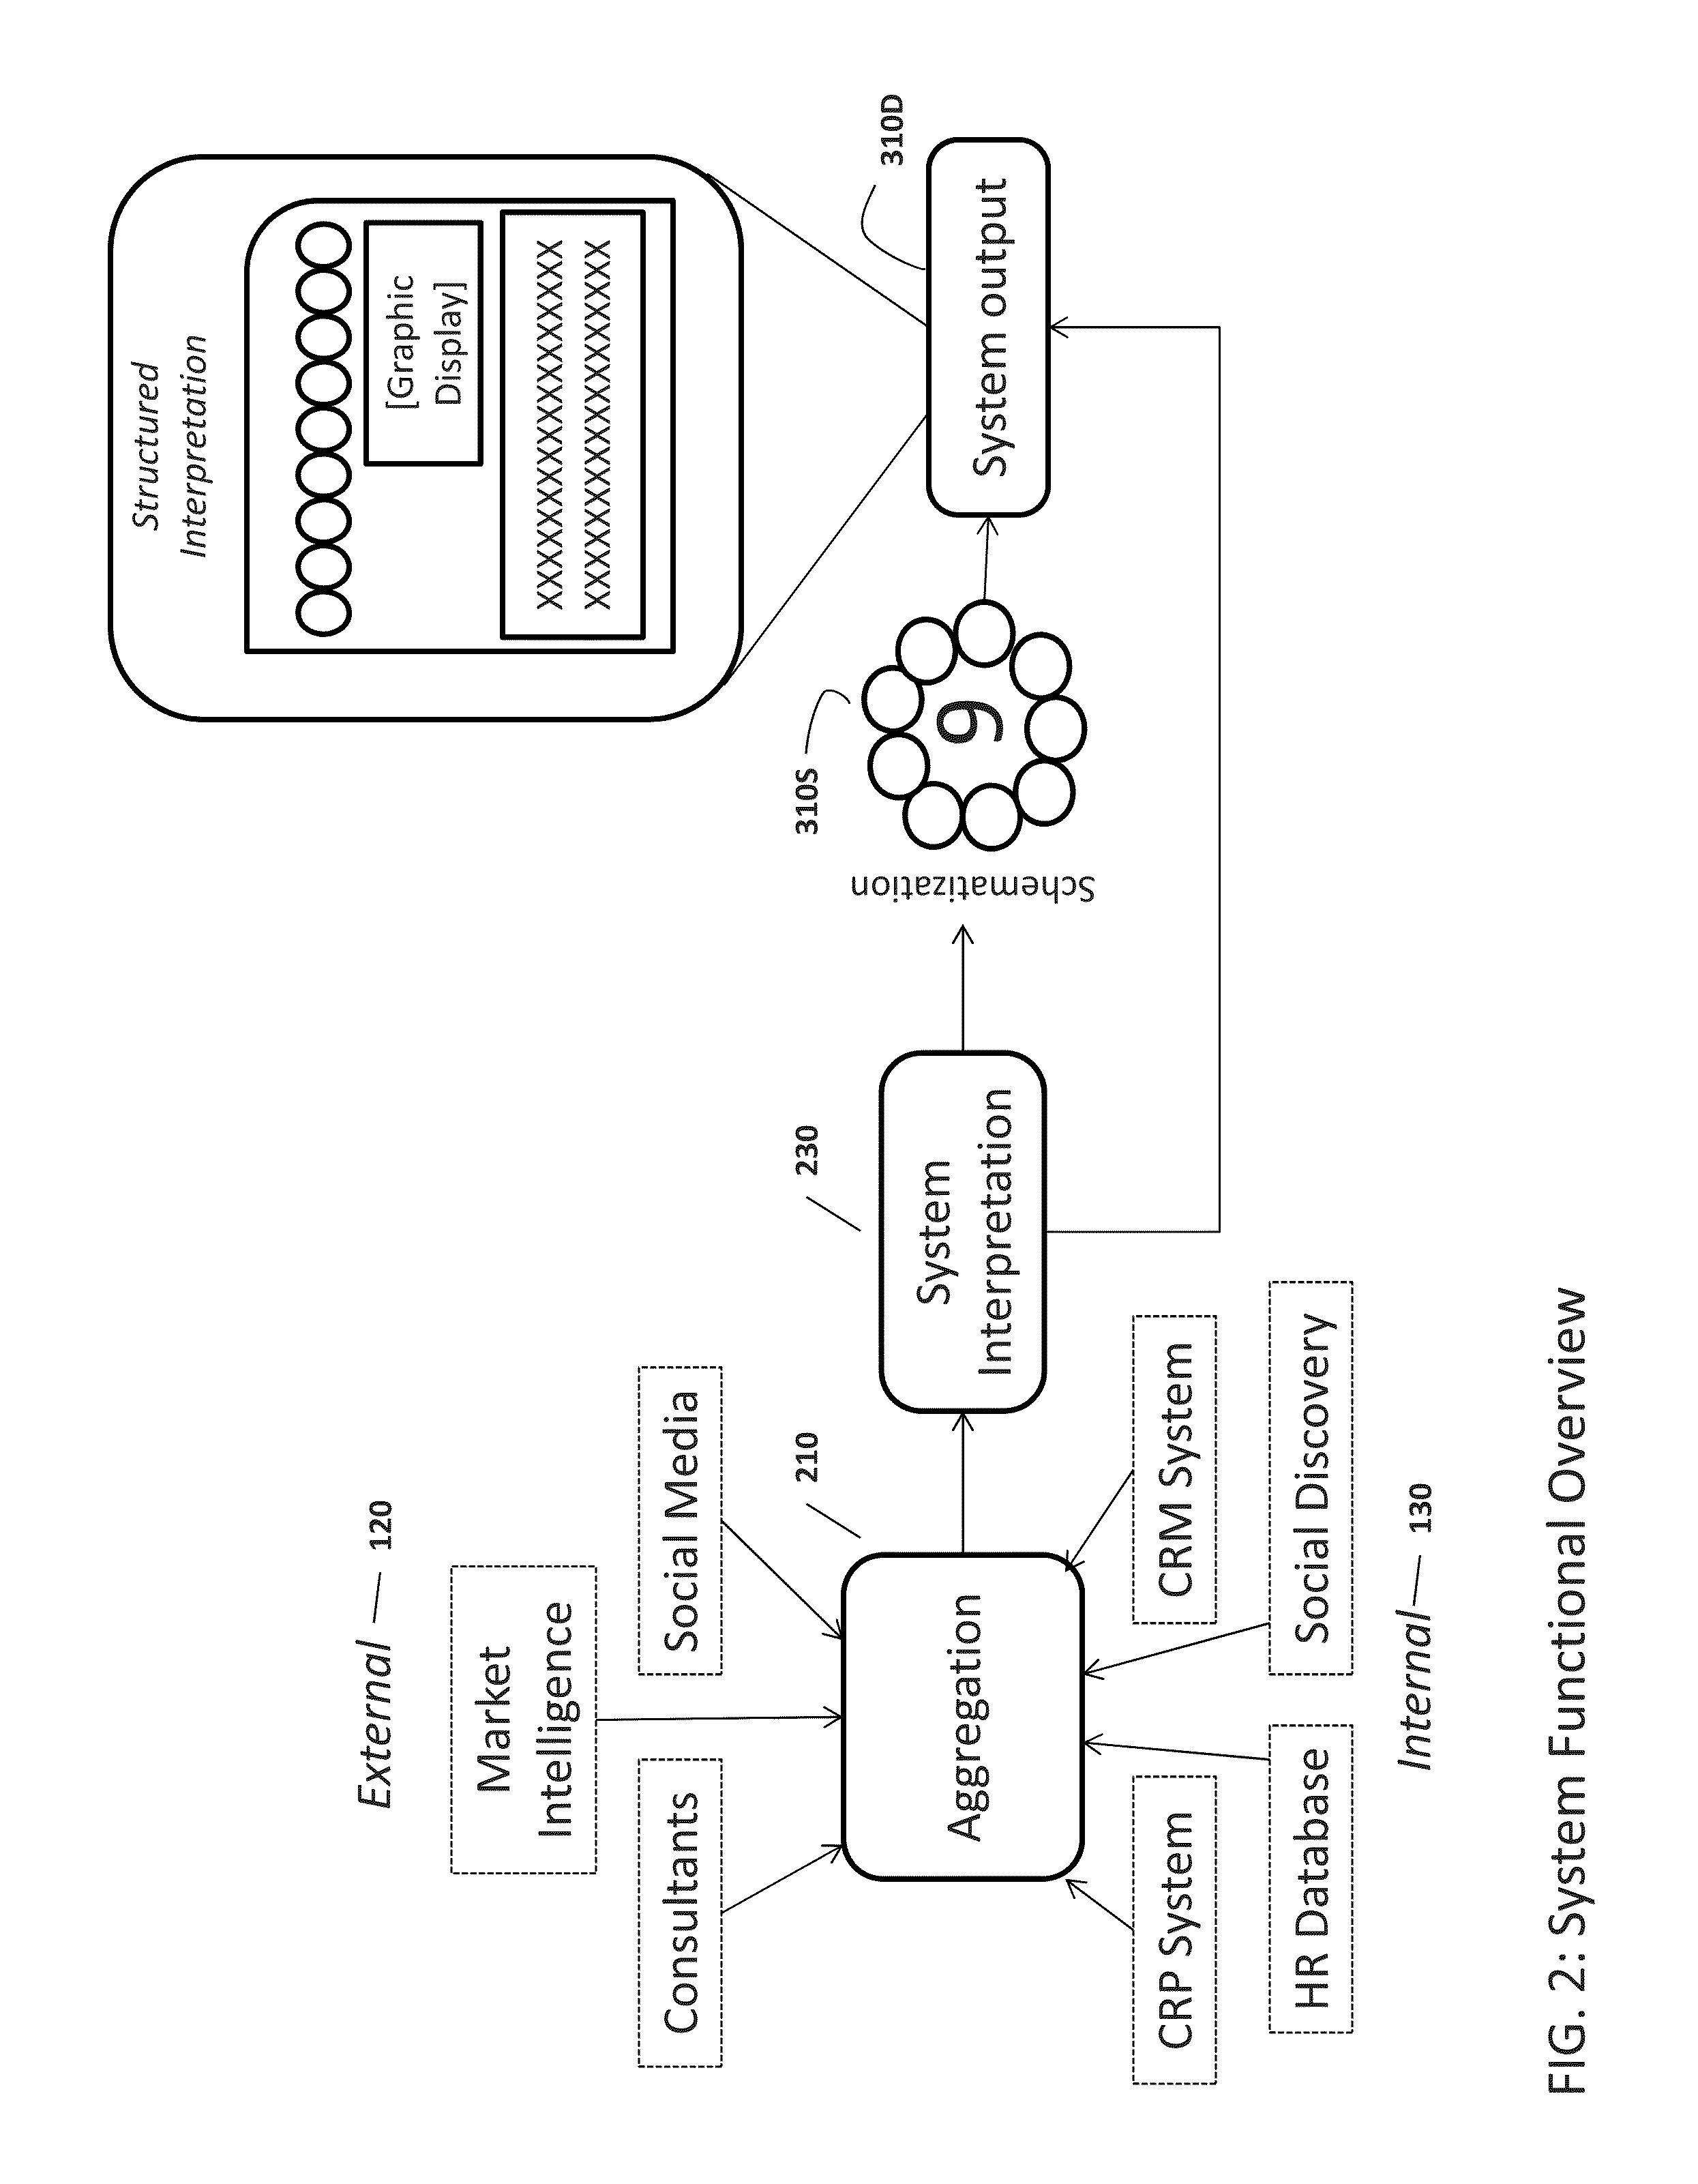 System and method for optimizing business performance with automated social discovery